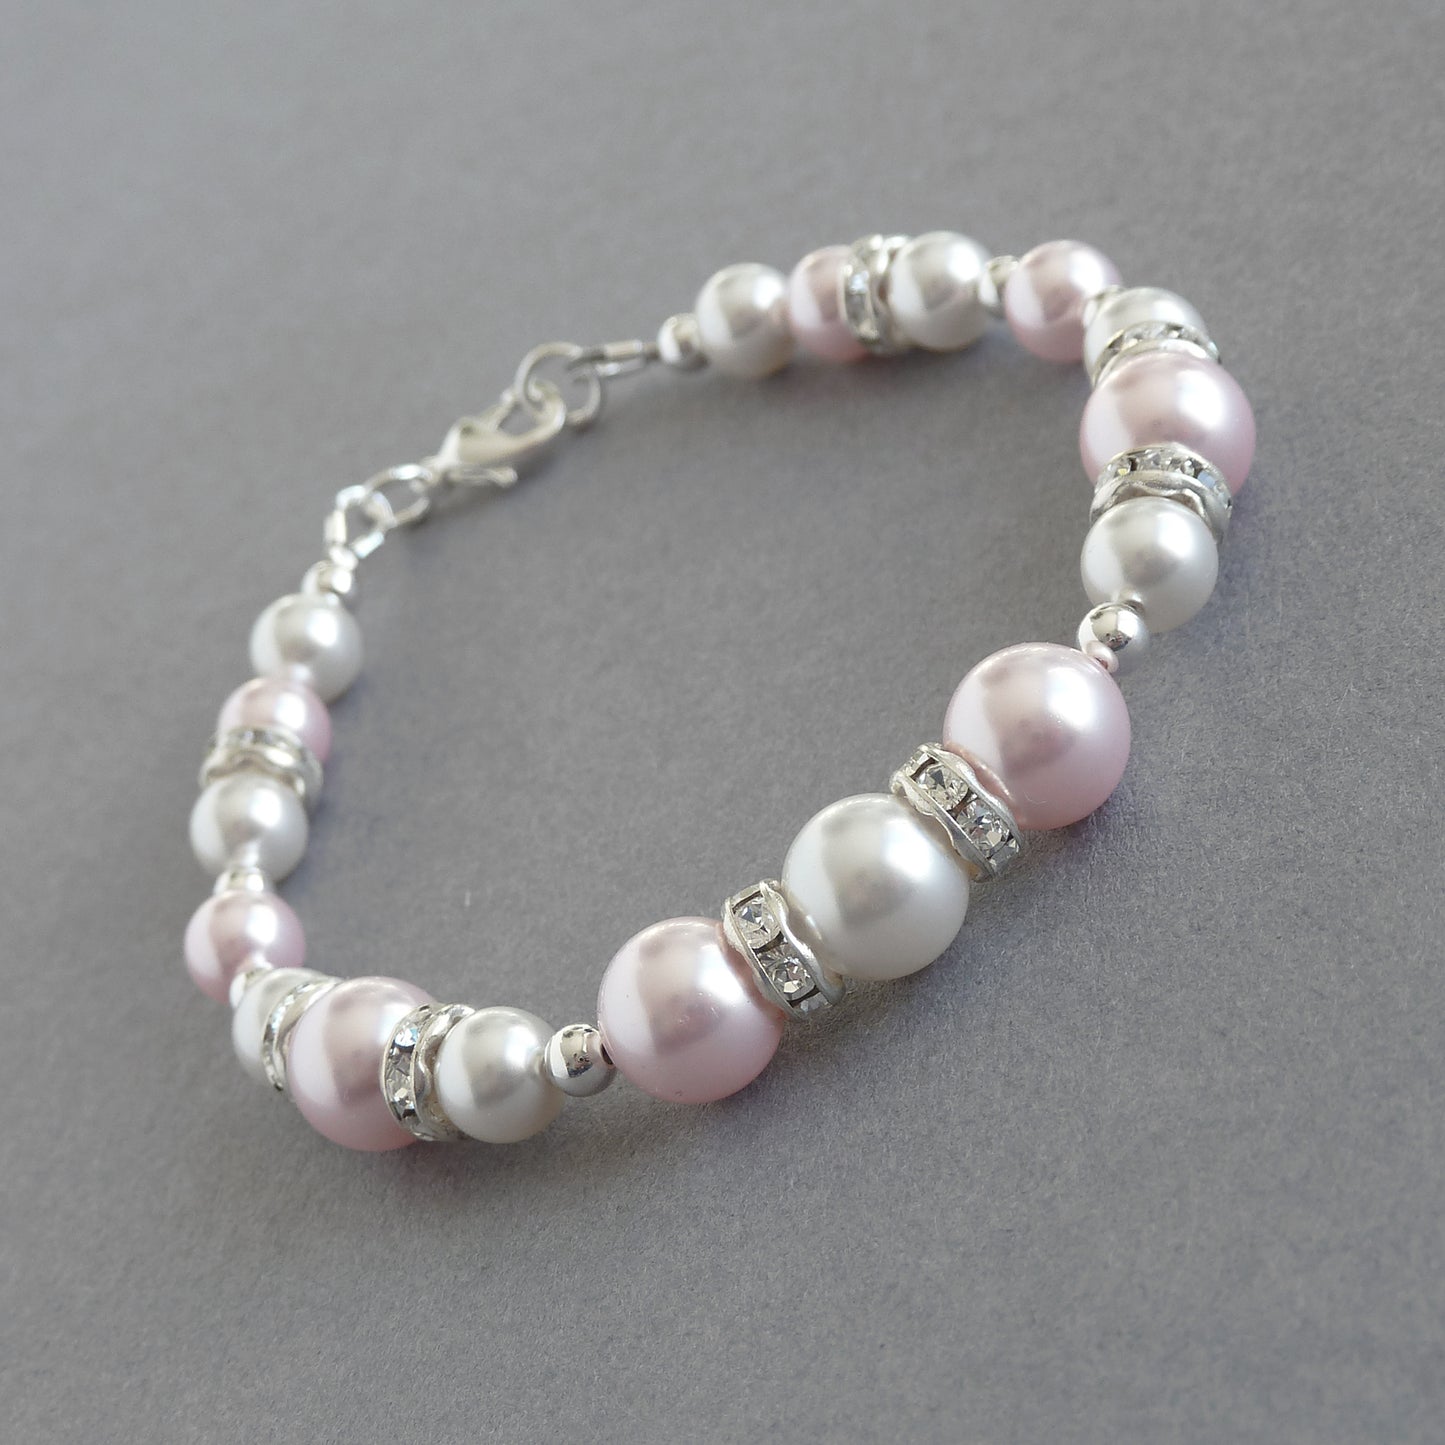 Blush pink pearl and crystal bracelet